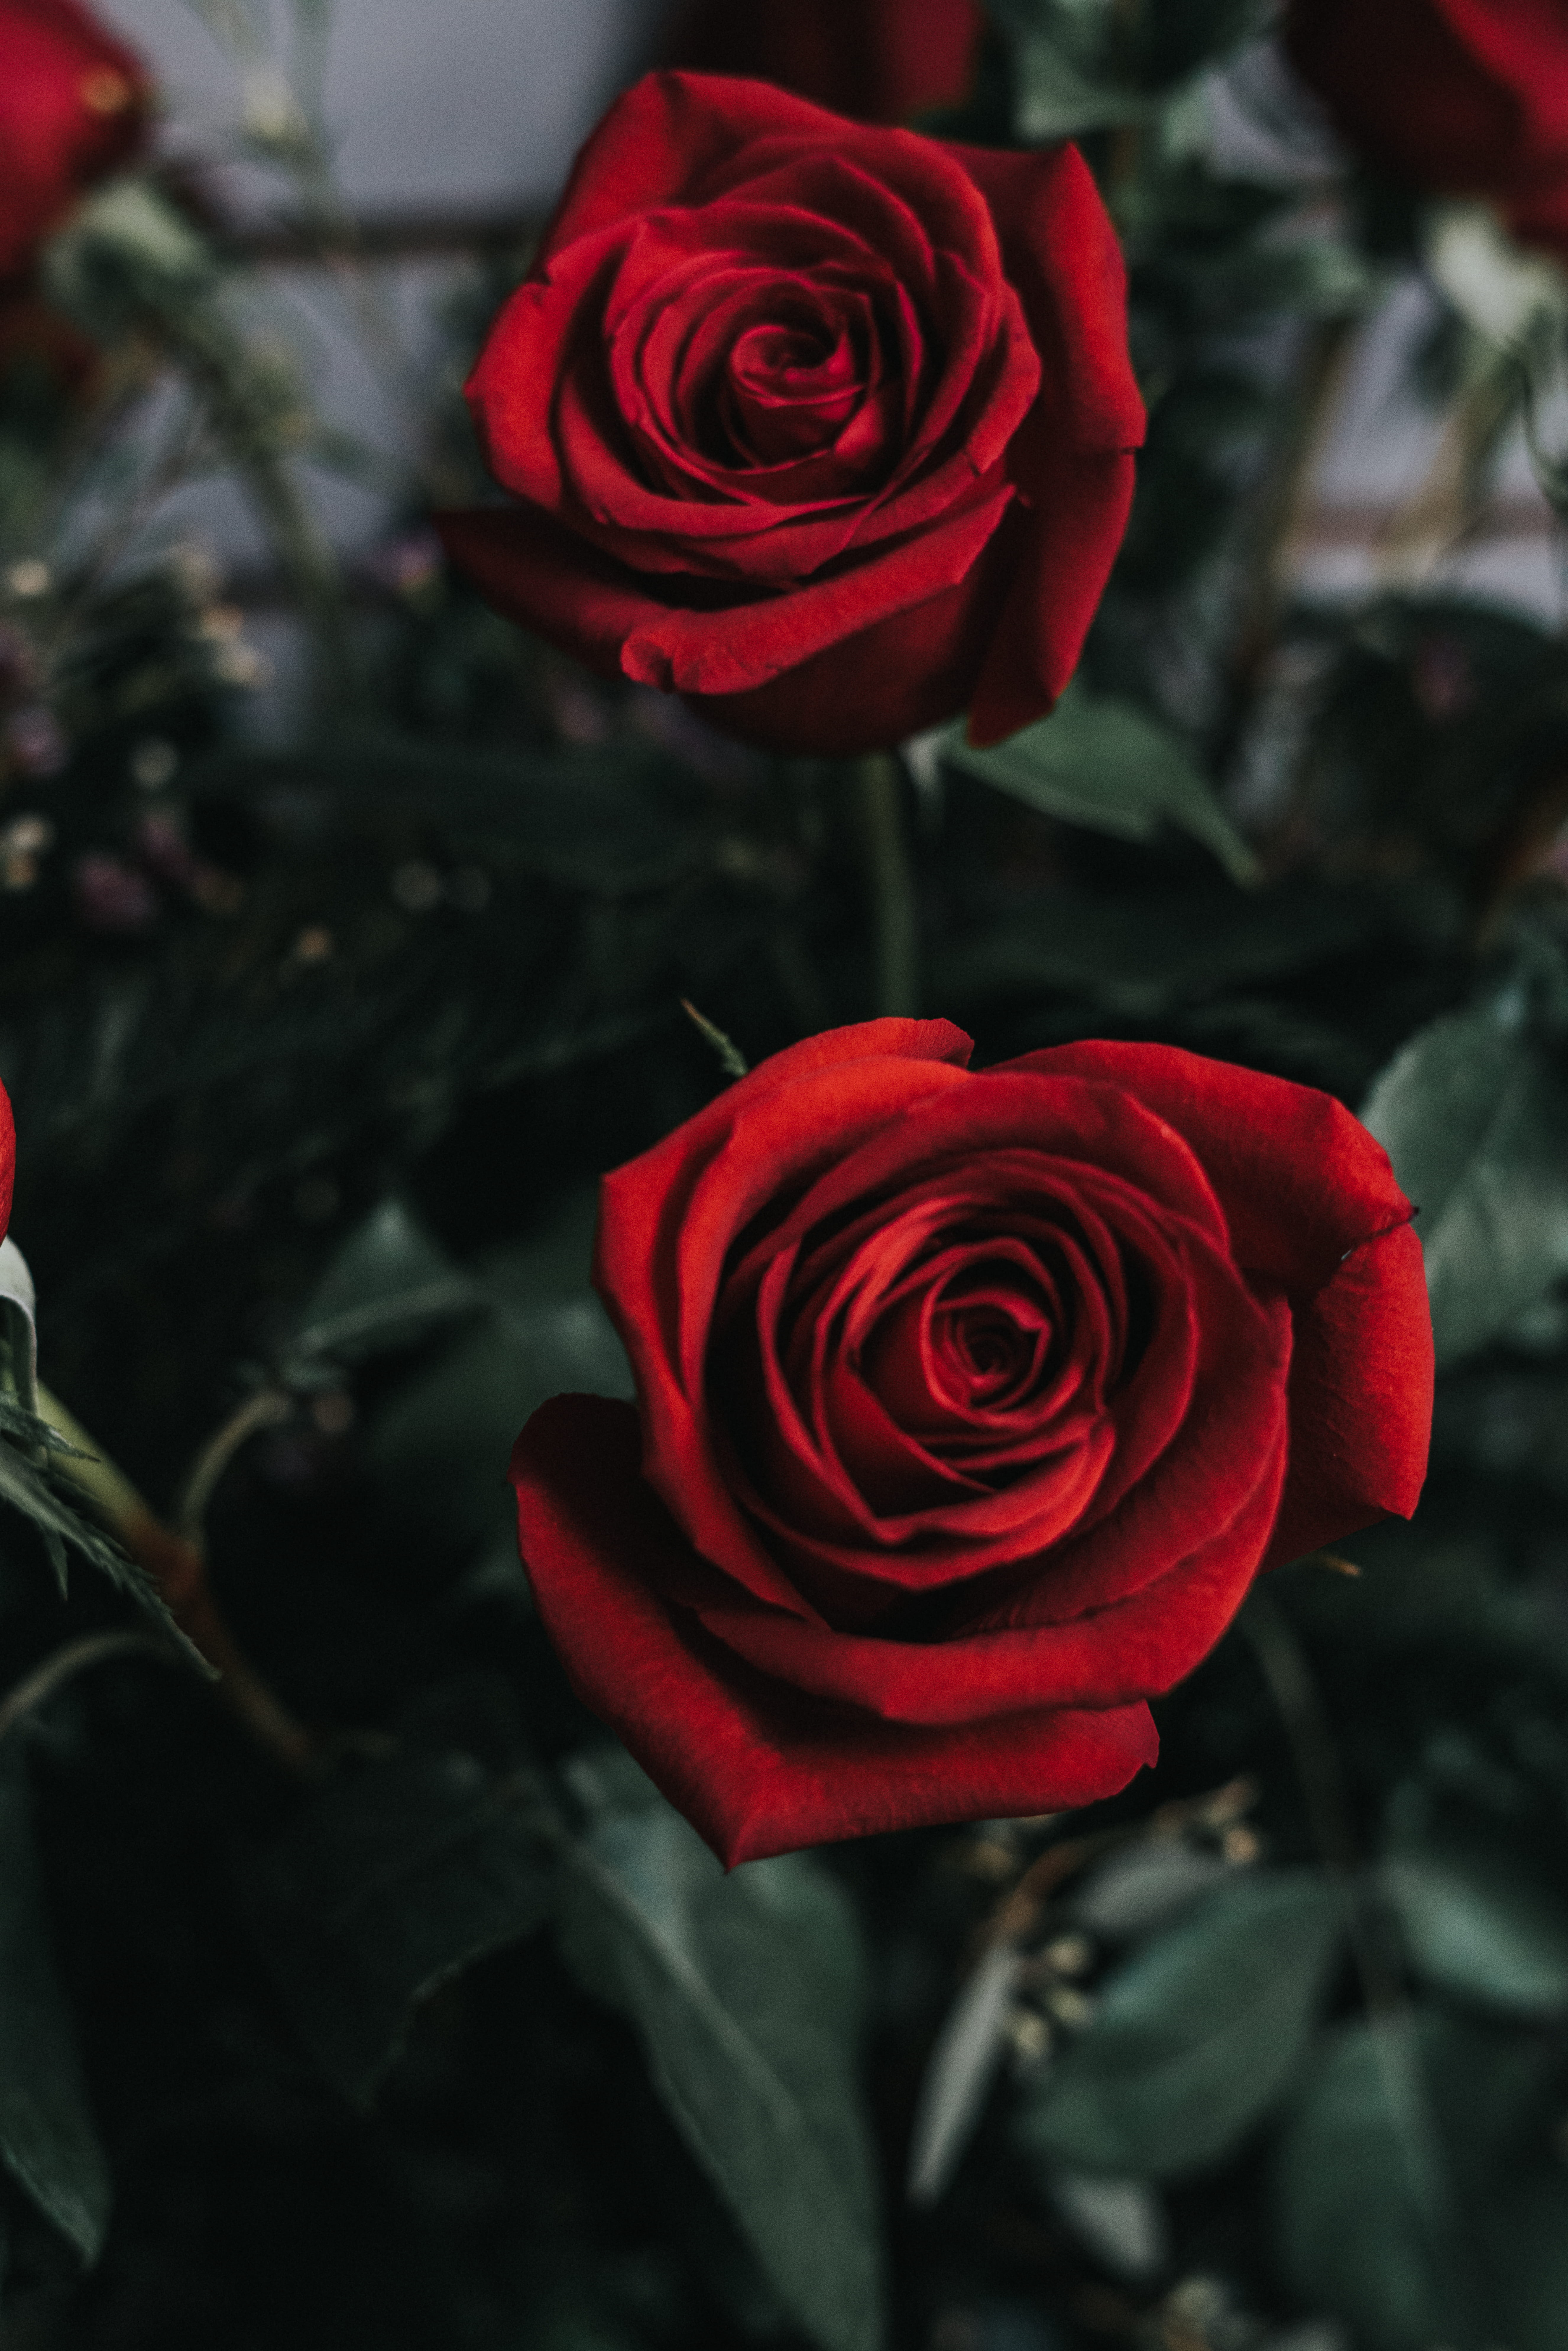 red roses, valentines day roses, wallpaper, flowers, beauty in nature